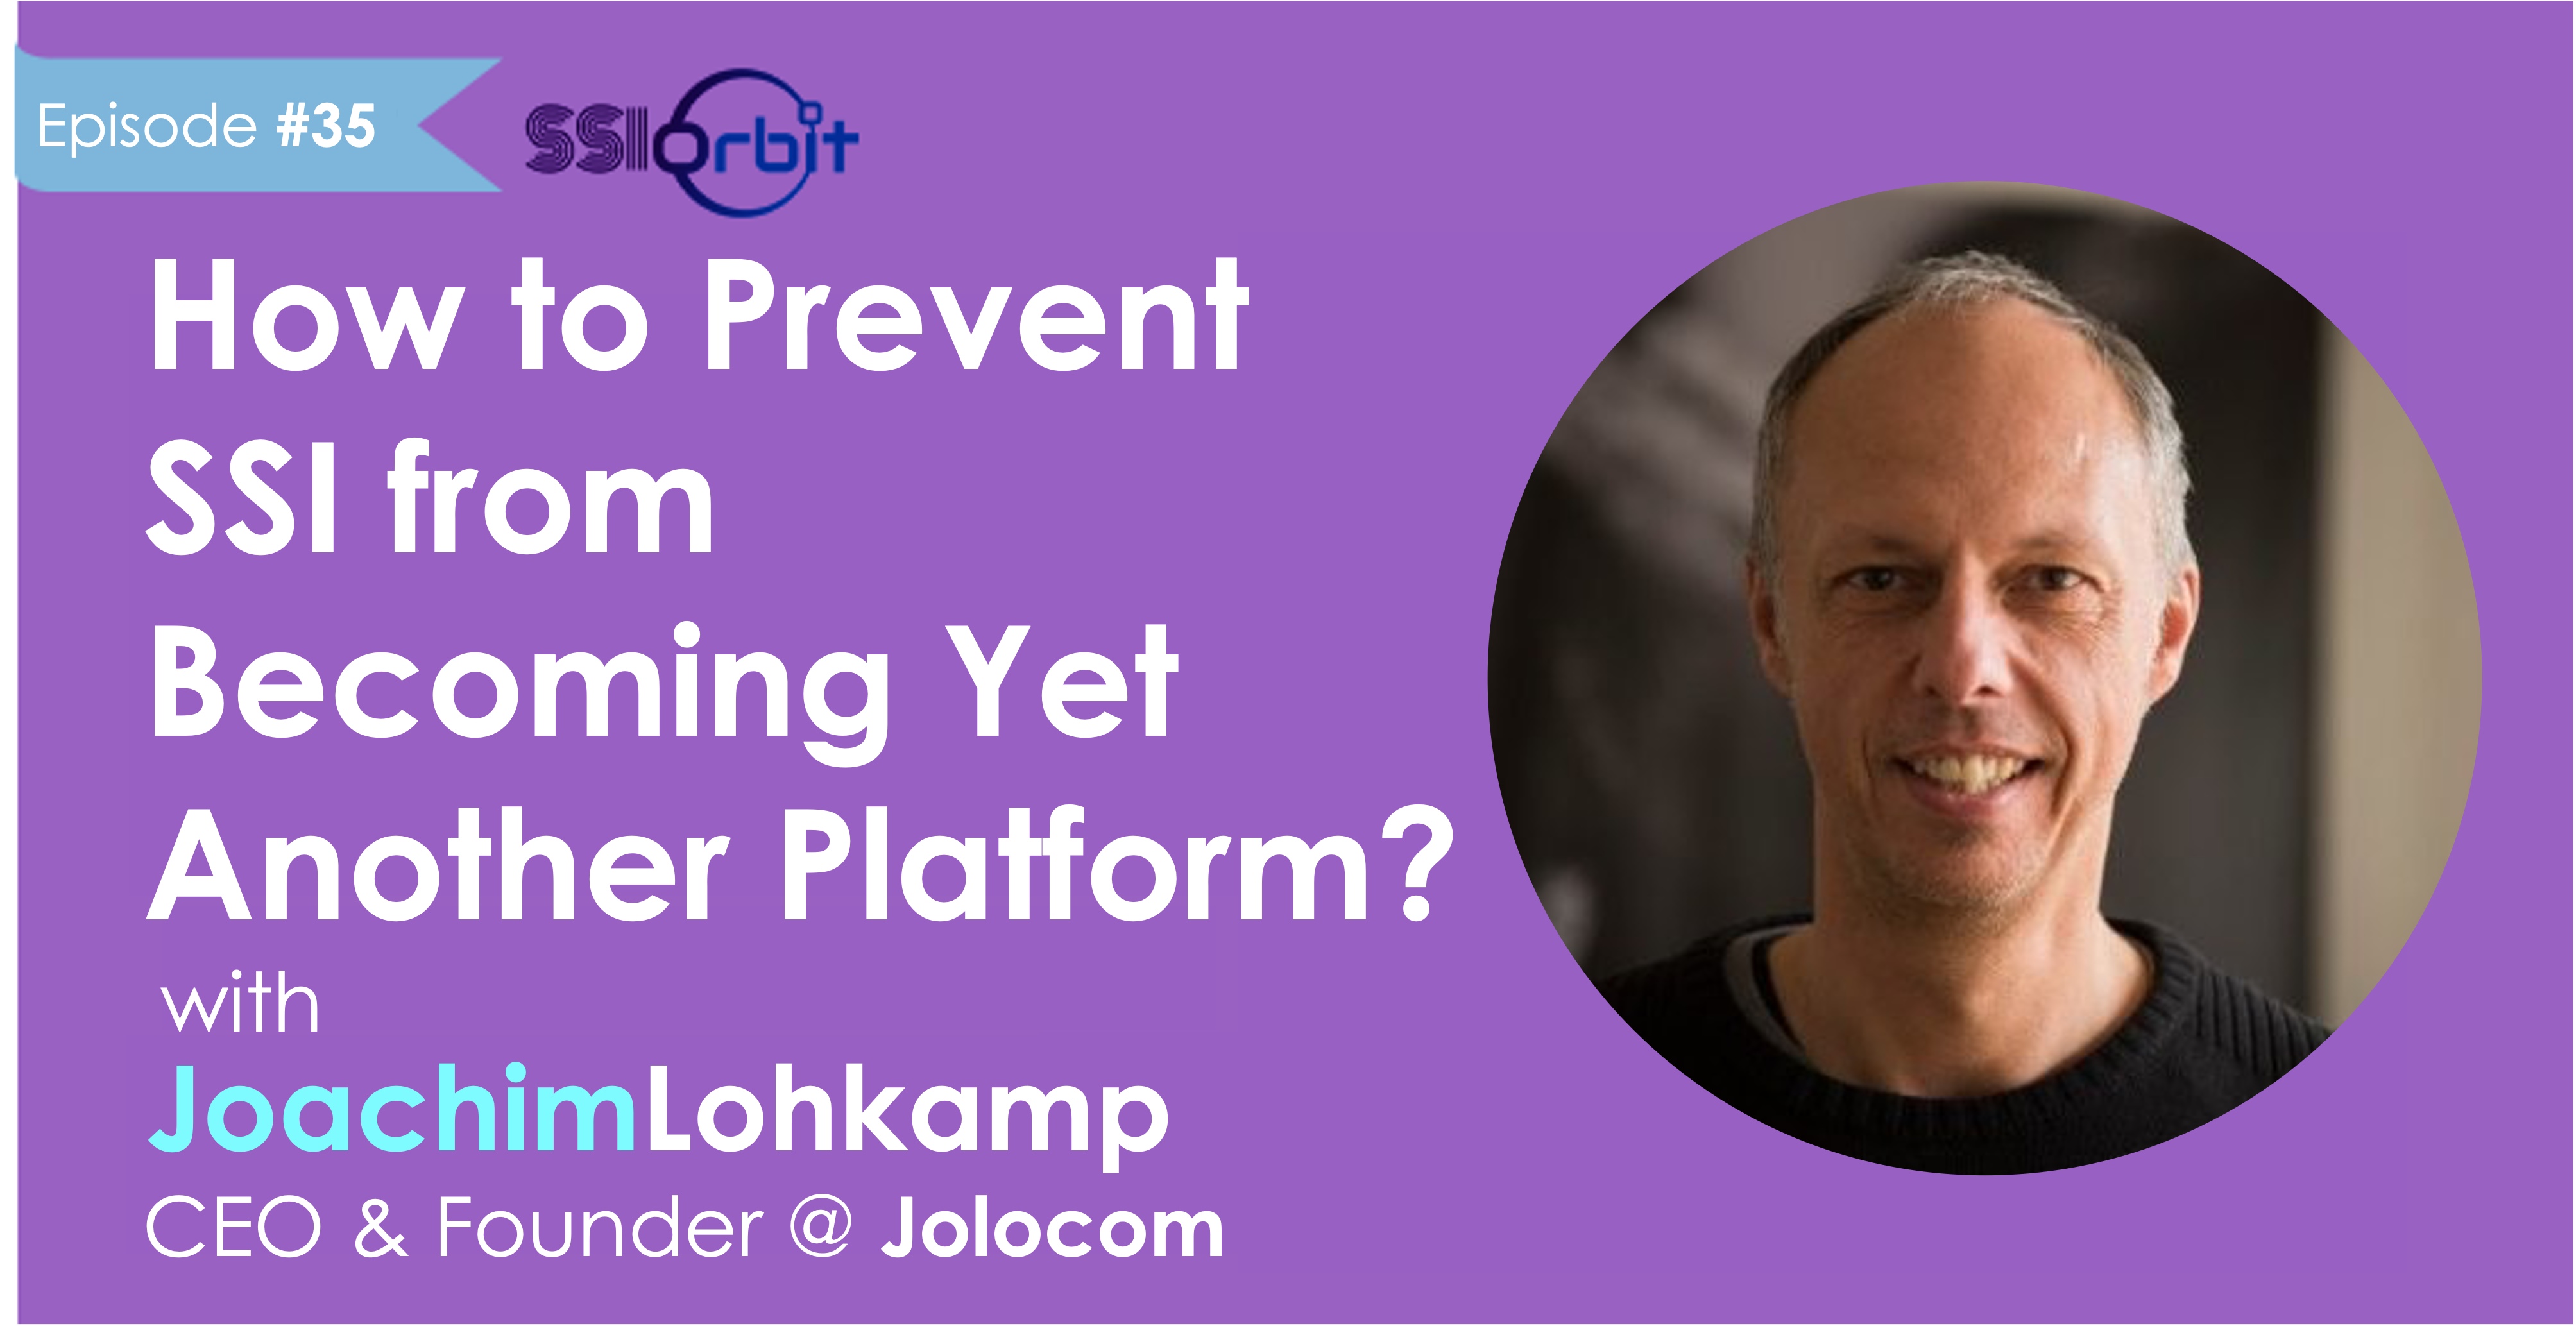 How to Prevent SSI from Becoming Yet Another Platform? (with Joachim Lohkamp)